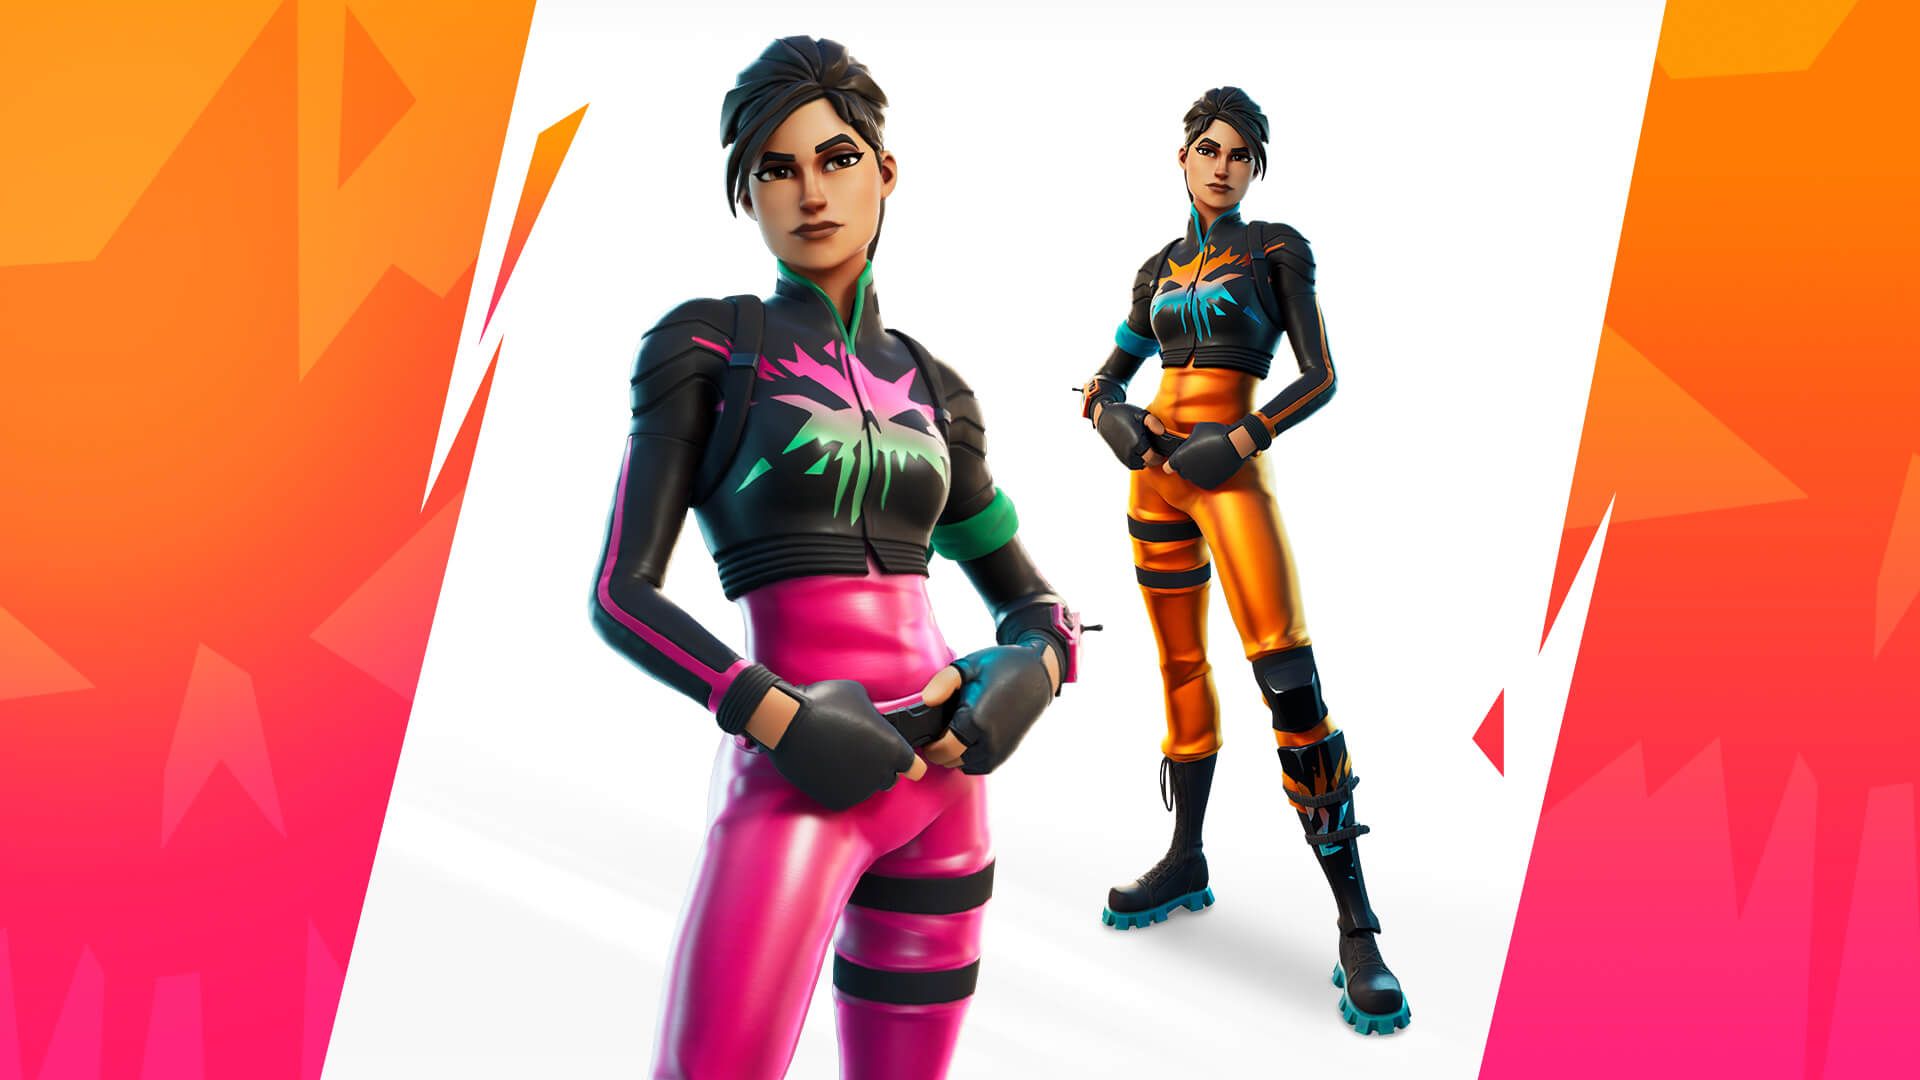 The Fortnite Trinity Challenge takes place March 14, presented by Three